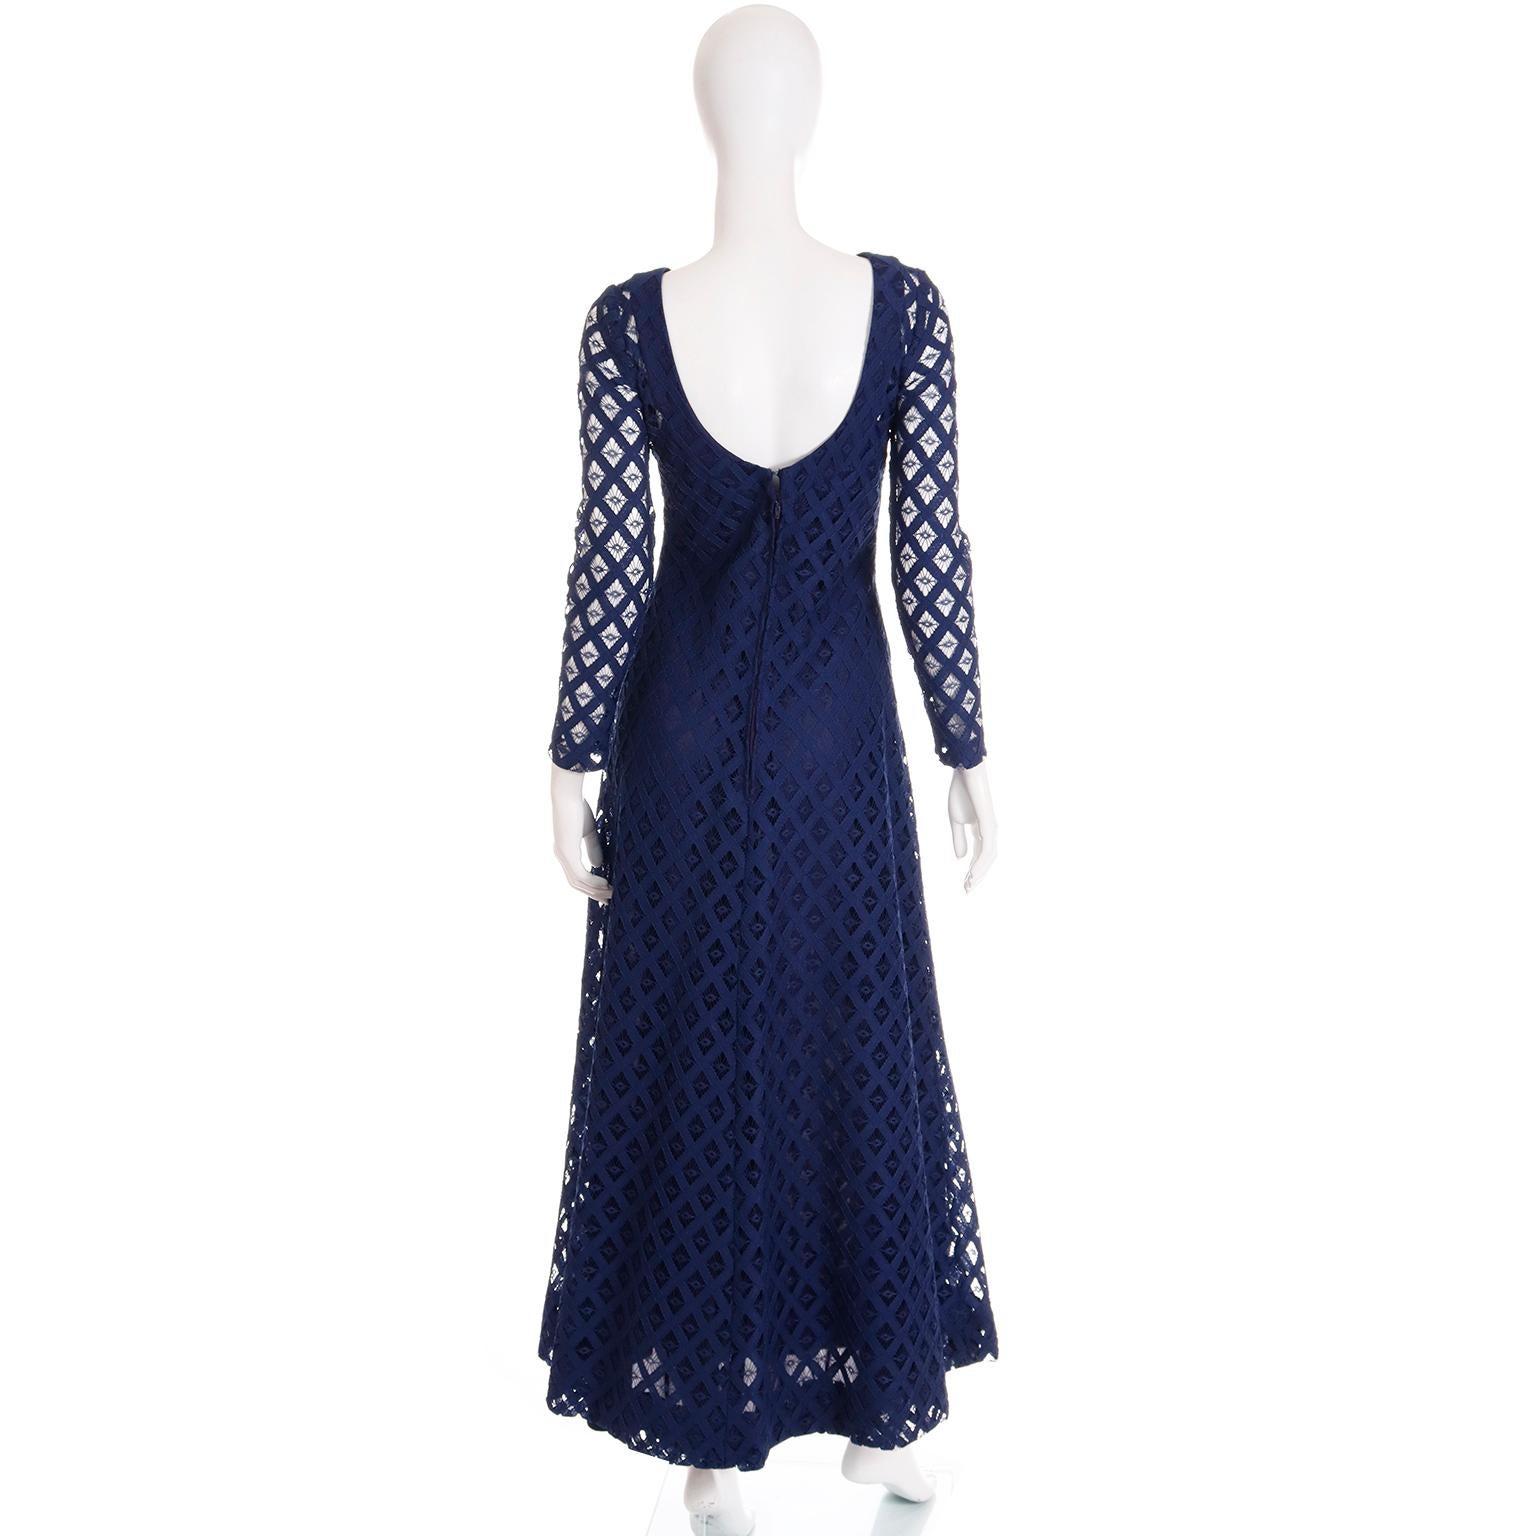 Women's 1970s Vintage Navy Blue Cutwork Maxi Dress with Blue lining